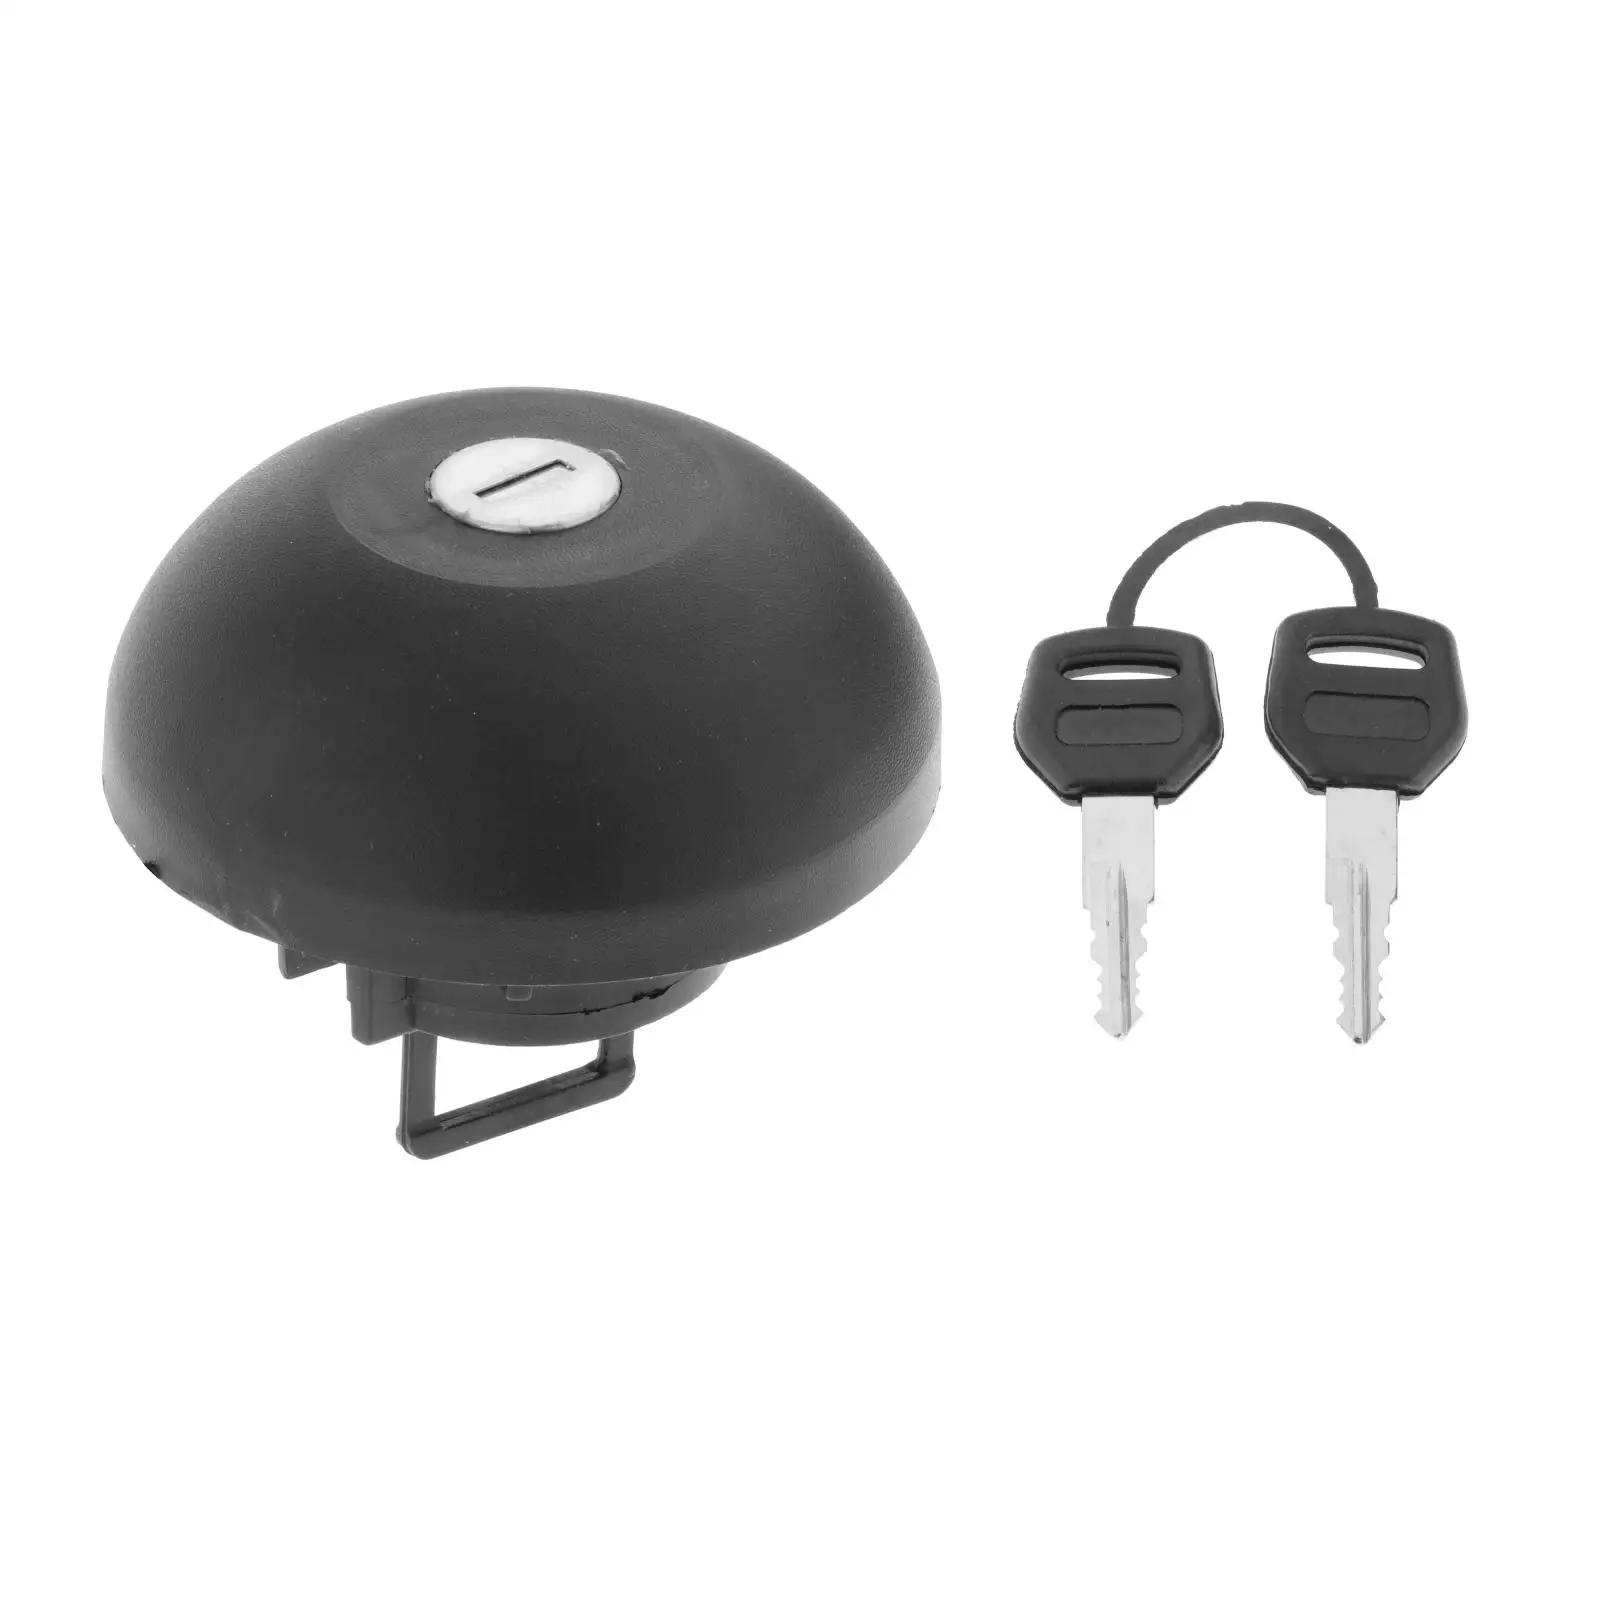 Car Fuel Tank Locking Cover Lid w/ 2 Keys Fit for for Clio II 7701471585 Replacement Parts Accessories